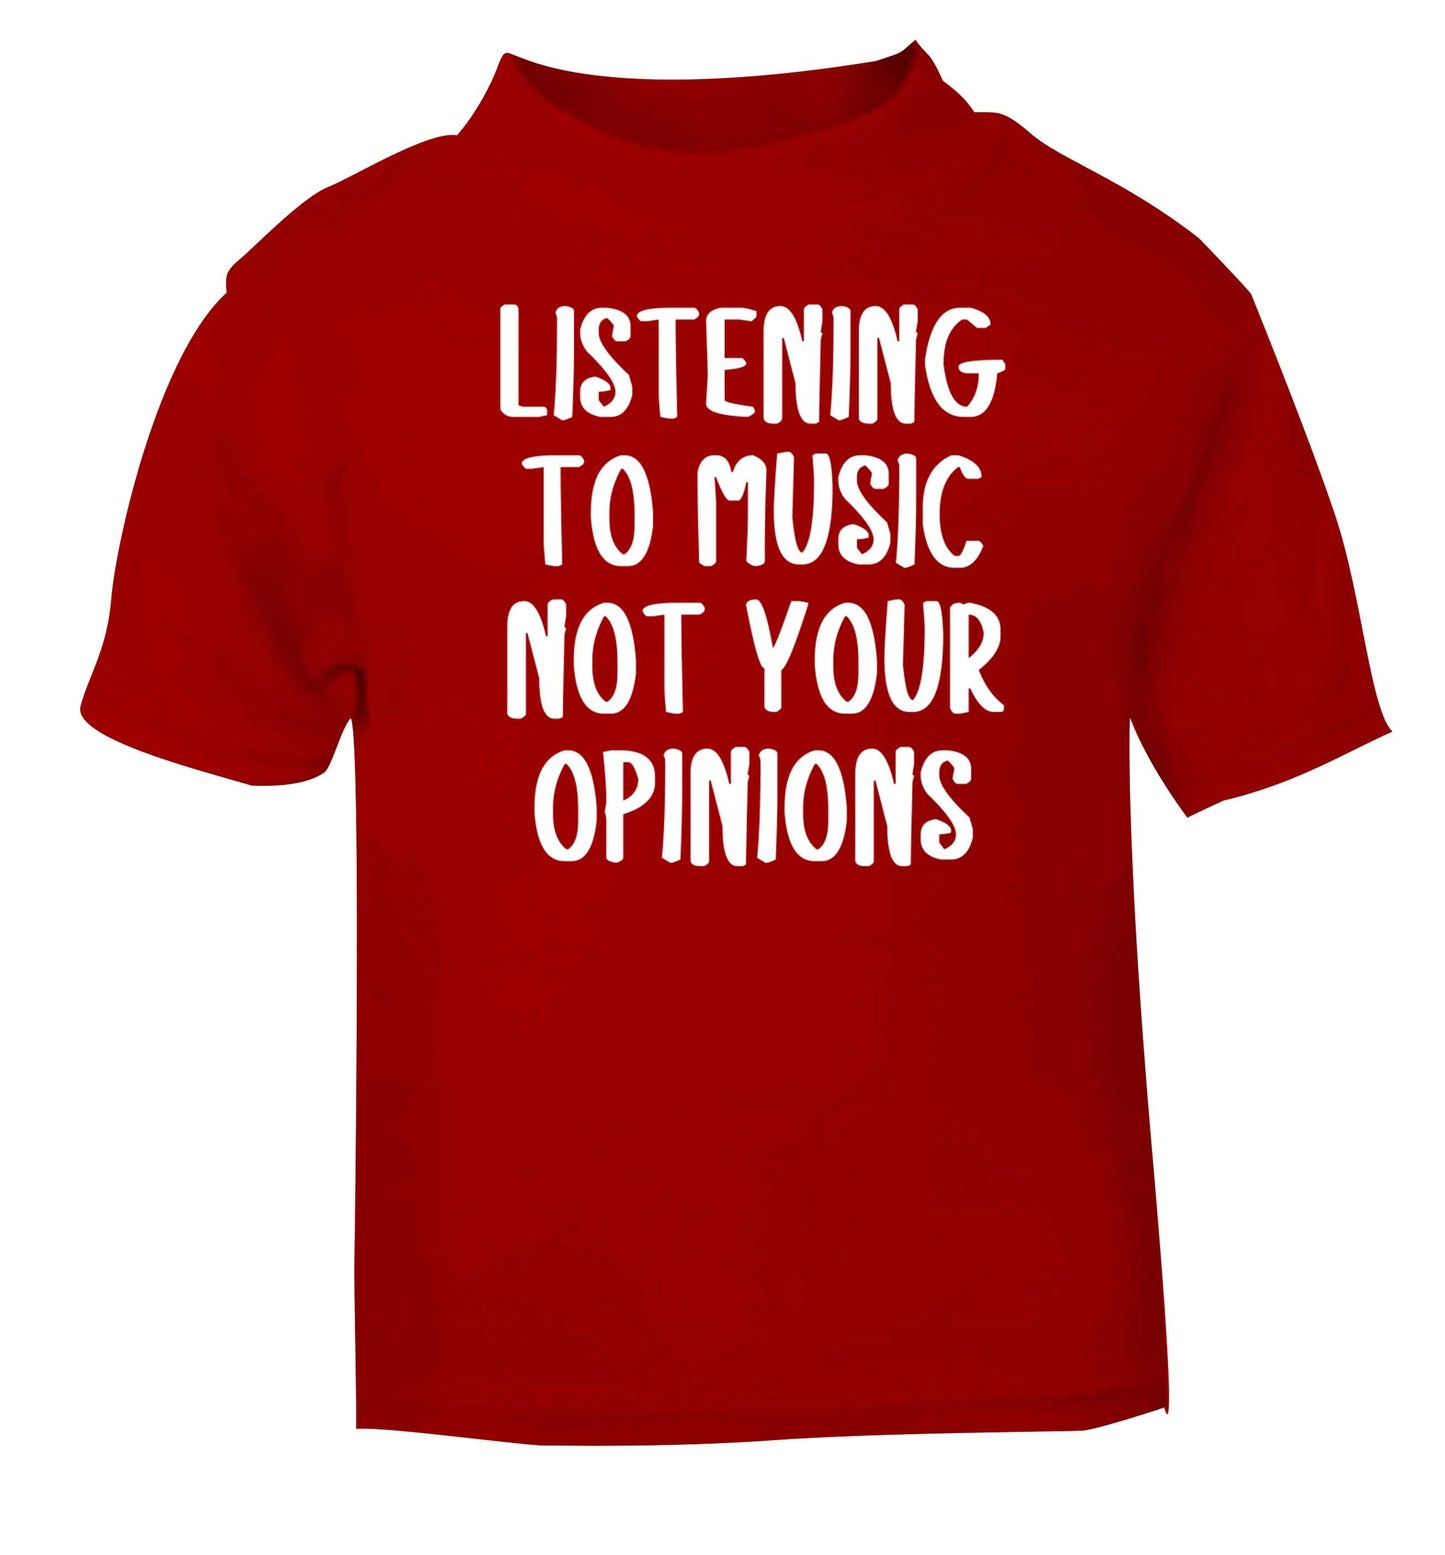 Listening to music not your opinions red baby toddler Tshirt 2 Years